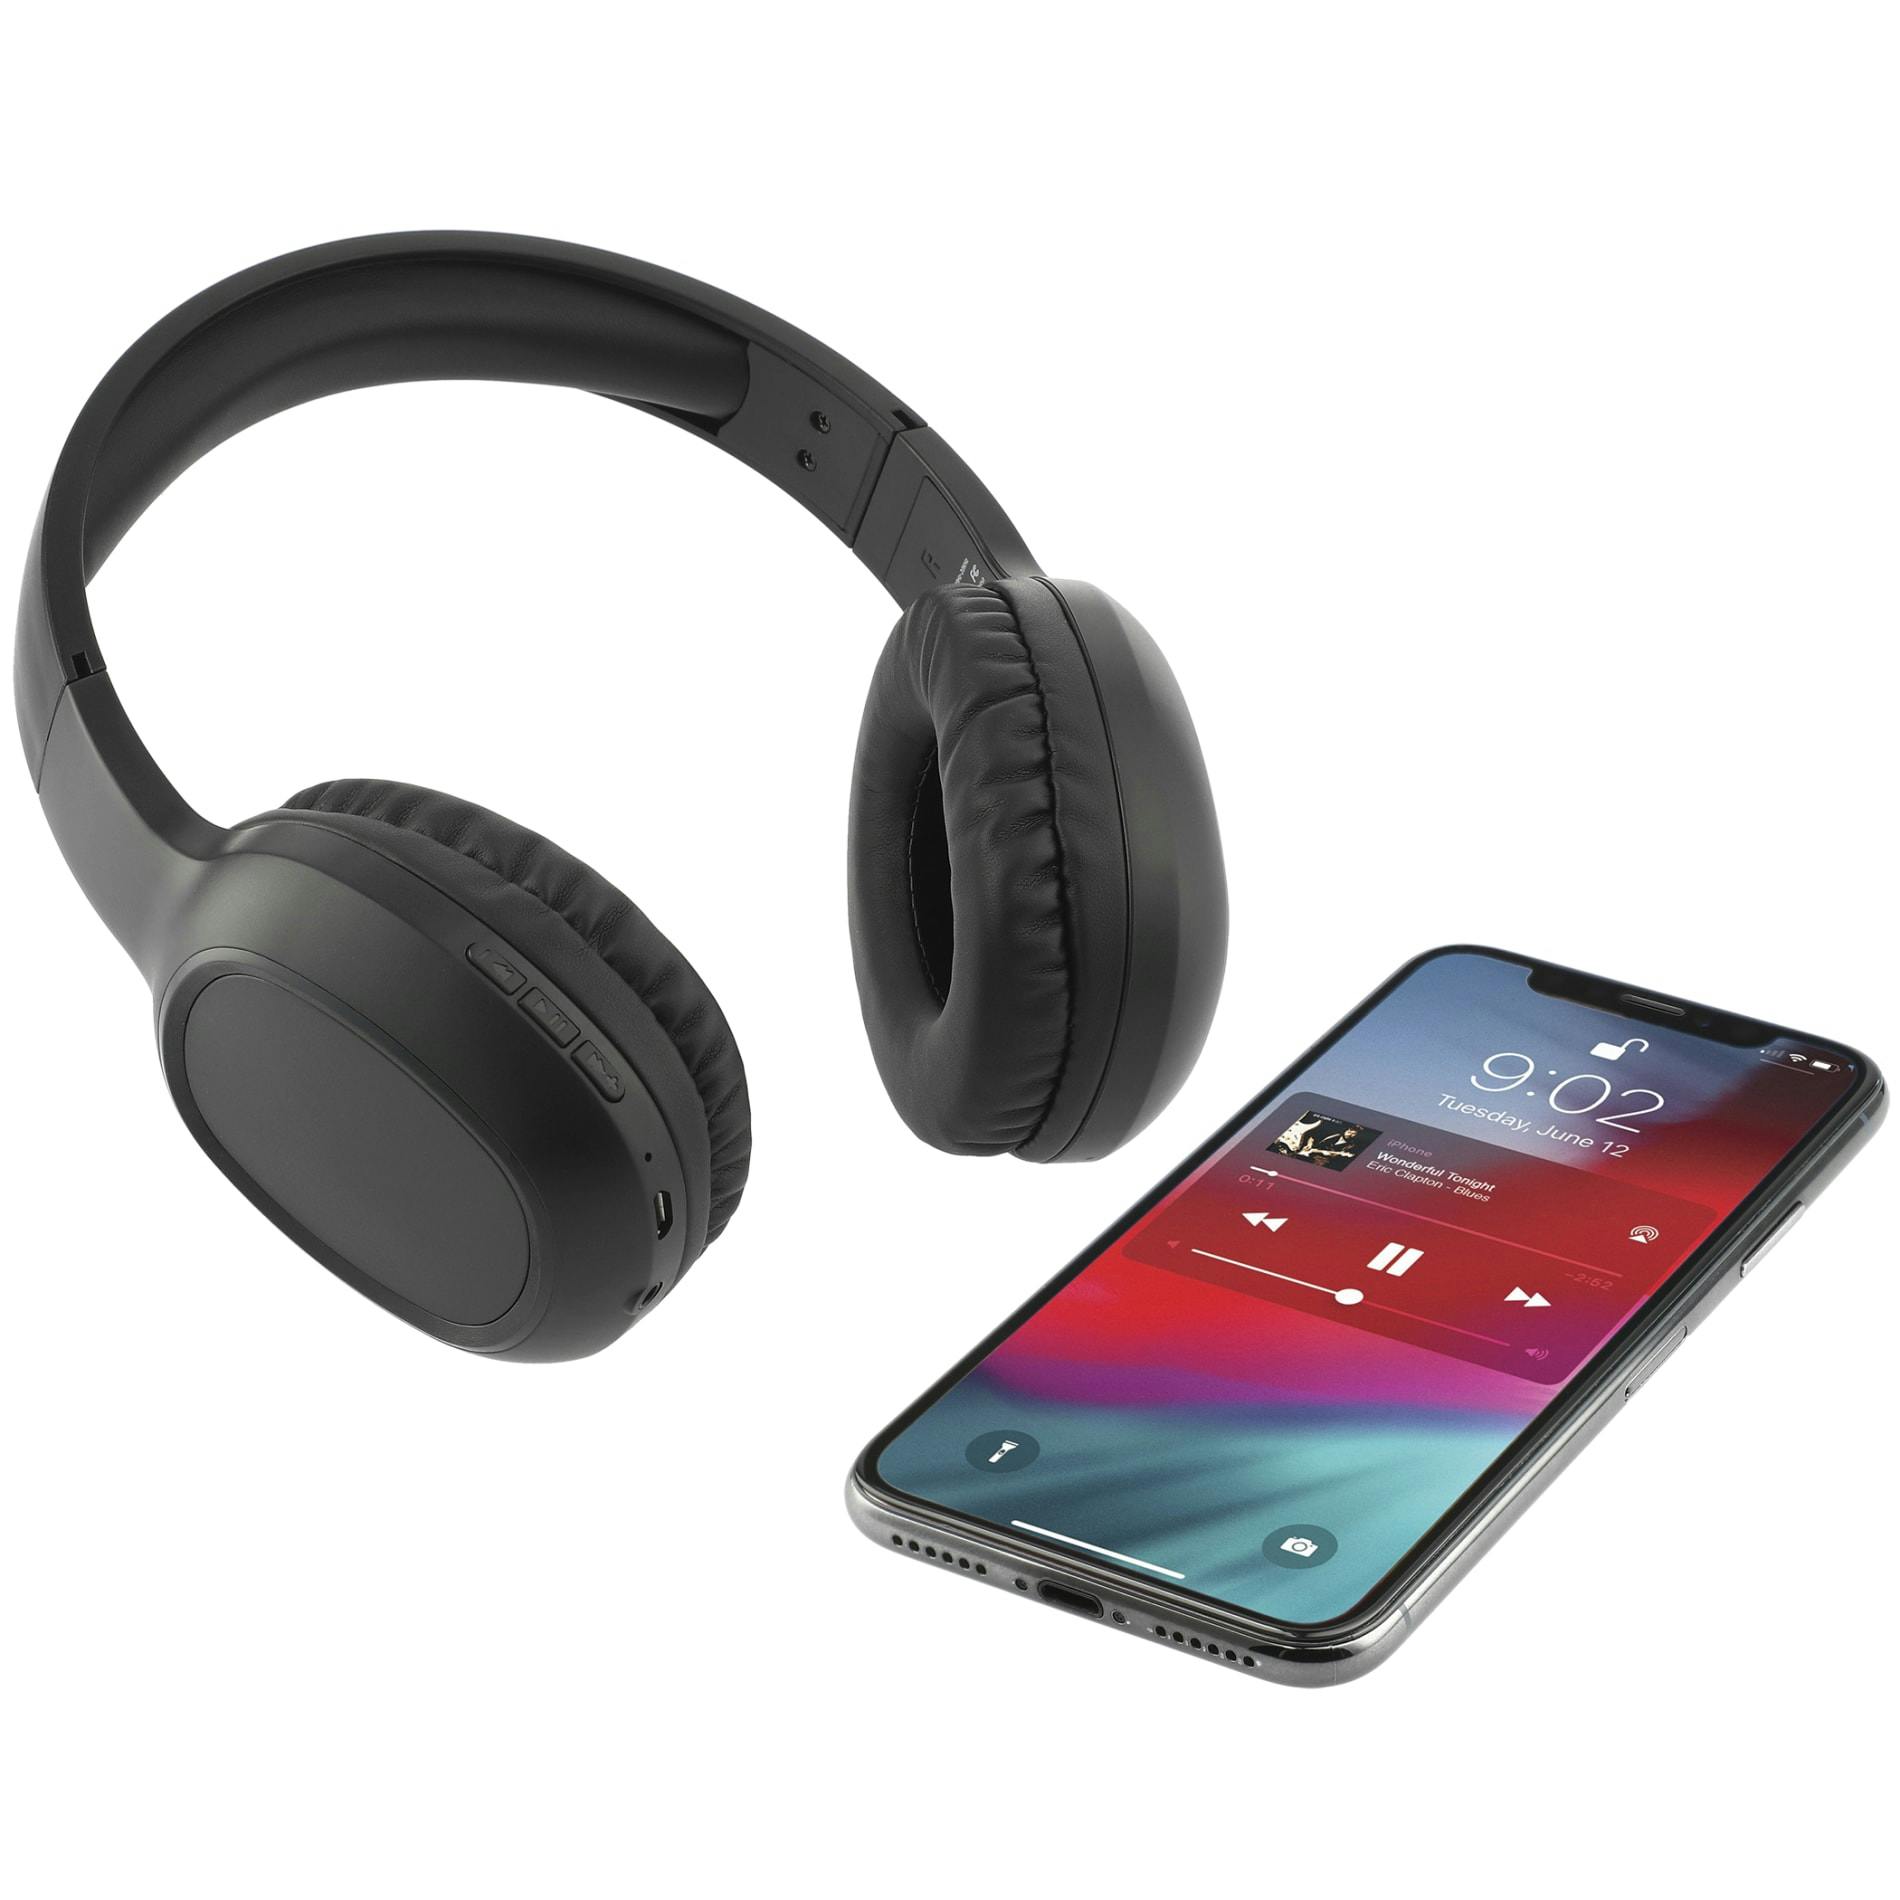 Oppo Bluetooth Headphones and Microphone - additional Image 1